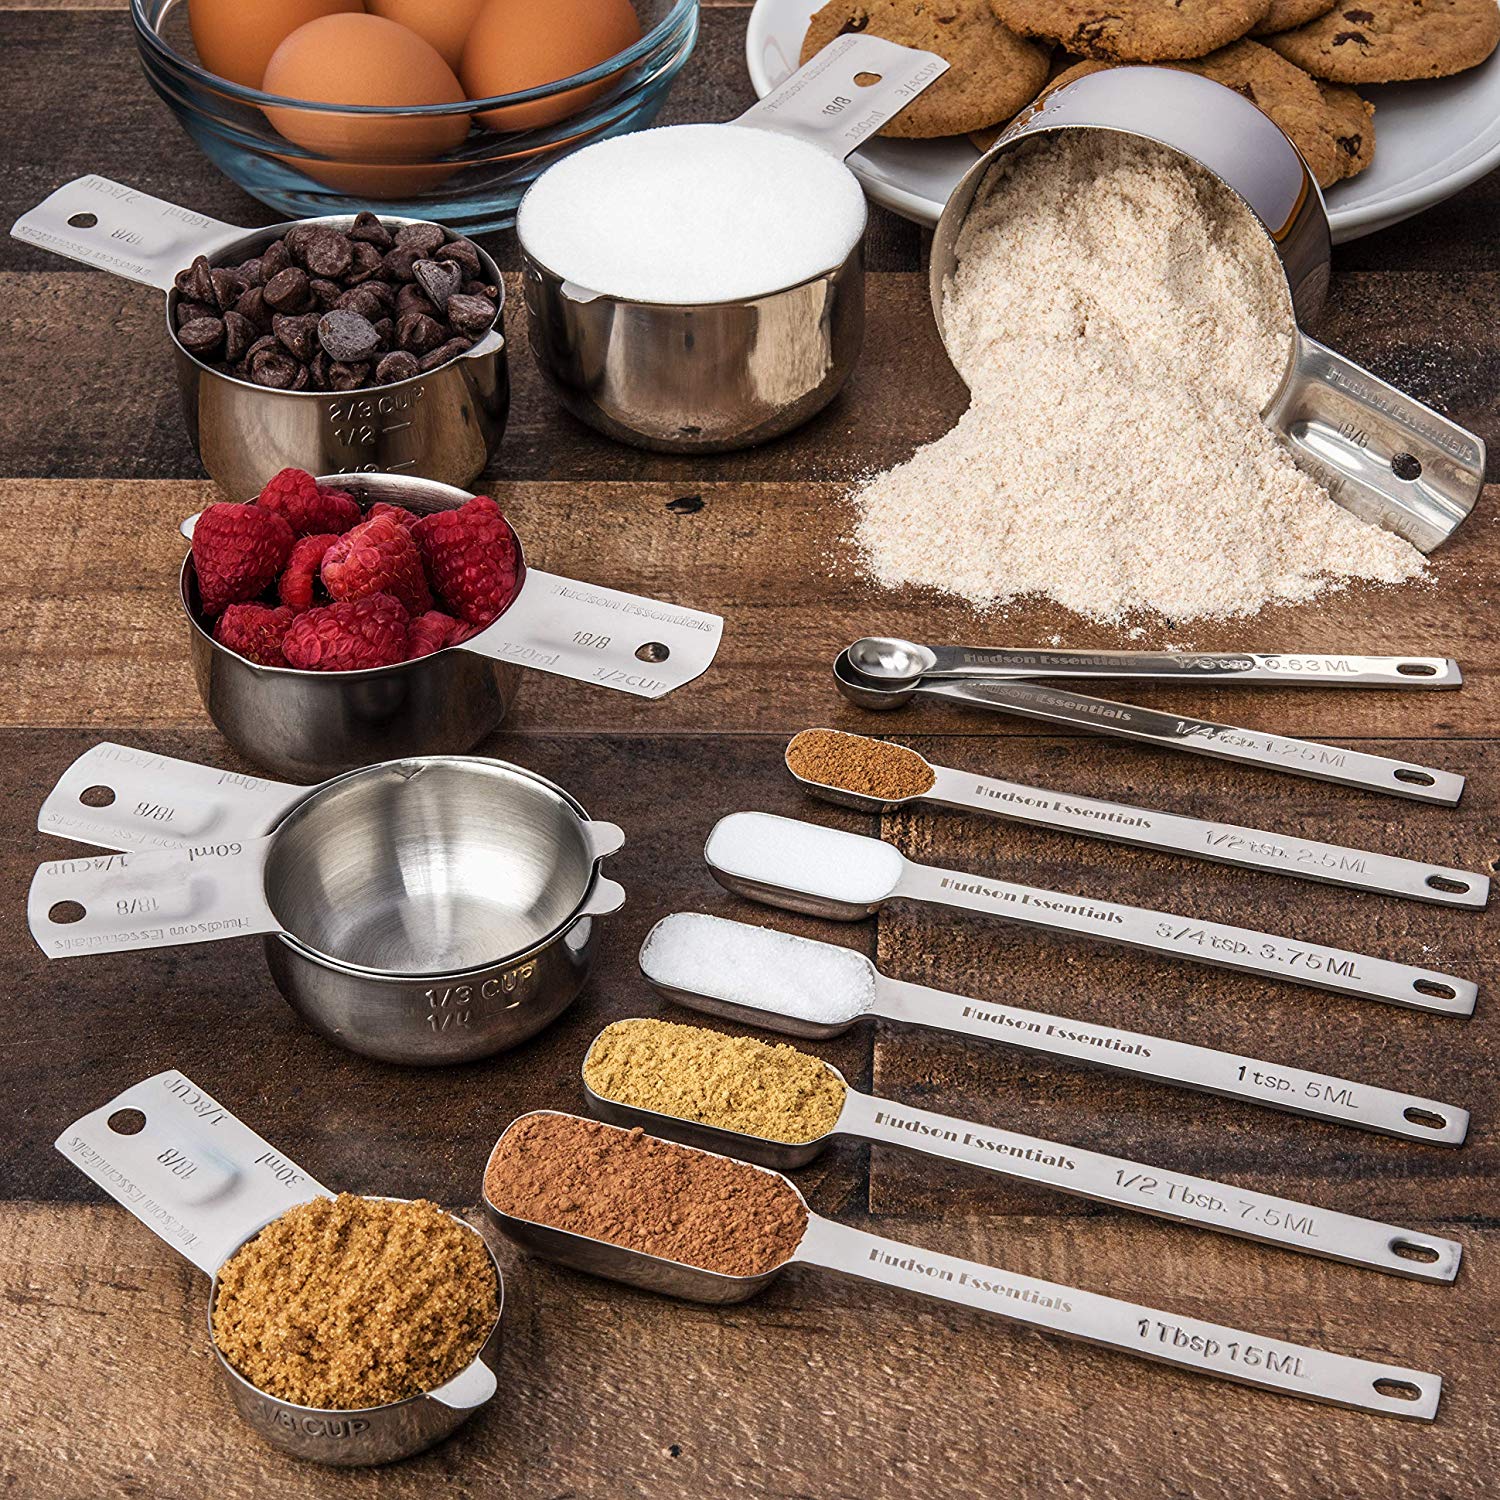 Hudson Essentials Stainless Steel Measuring Cups and Spoons Set (15 Piece Set)